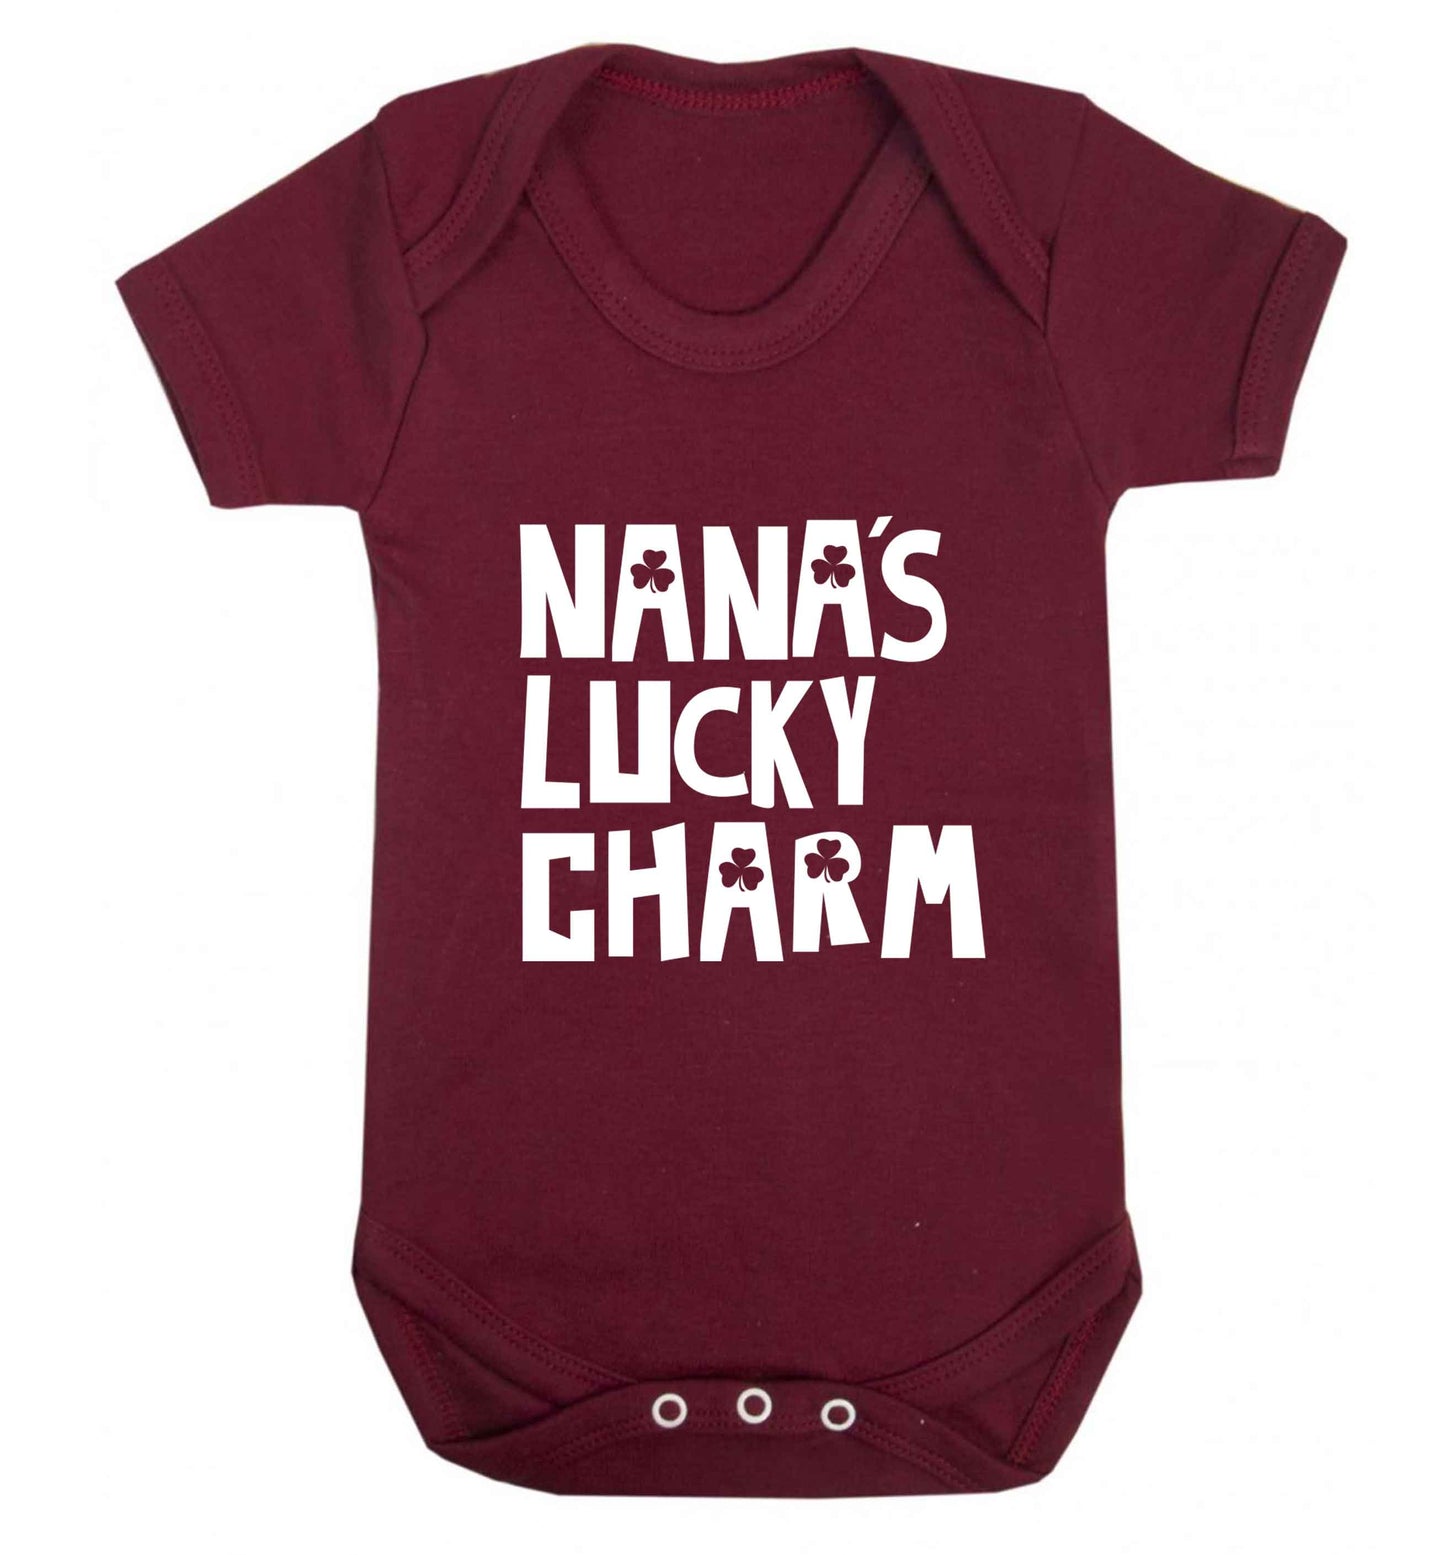 Nana's lucky charm baby vest maroon 18-24 months